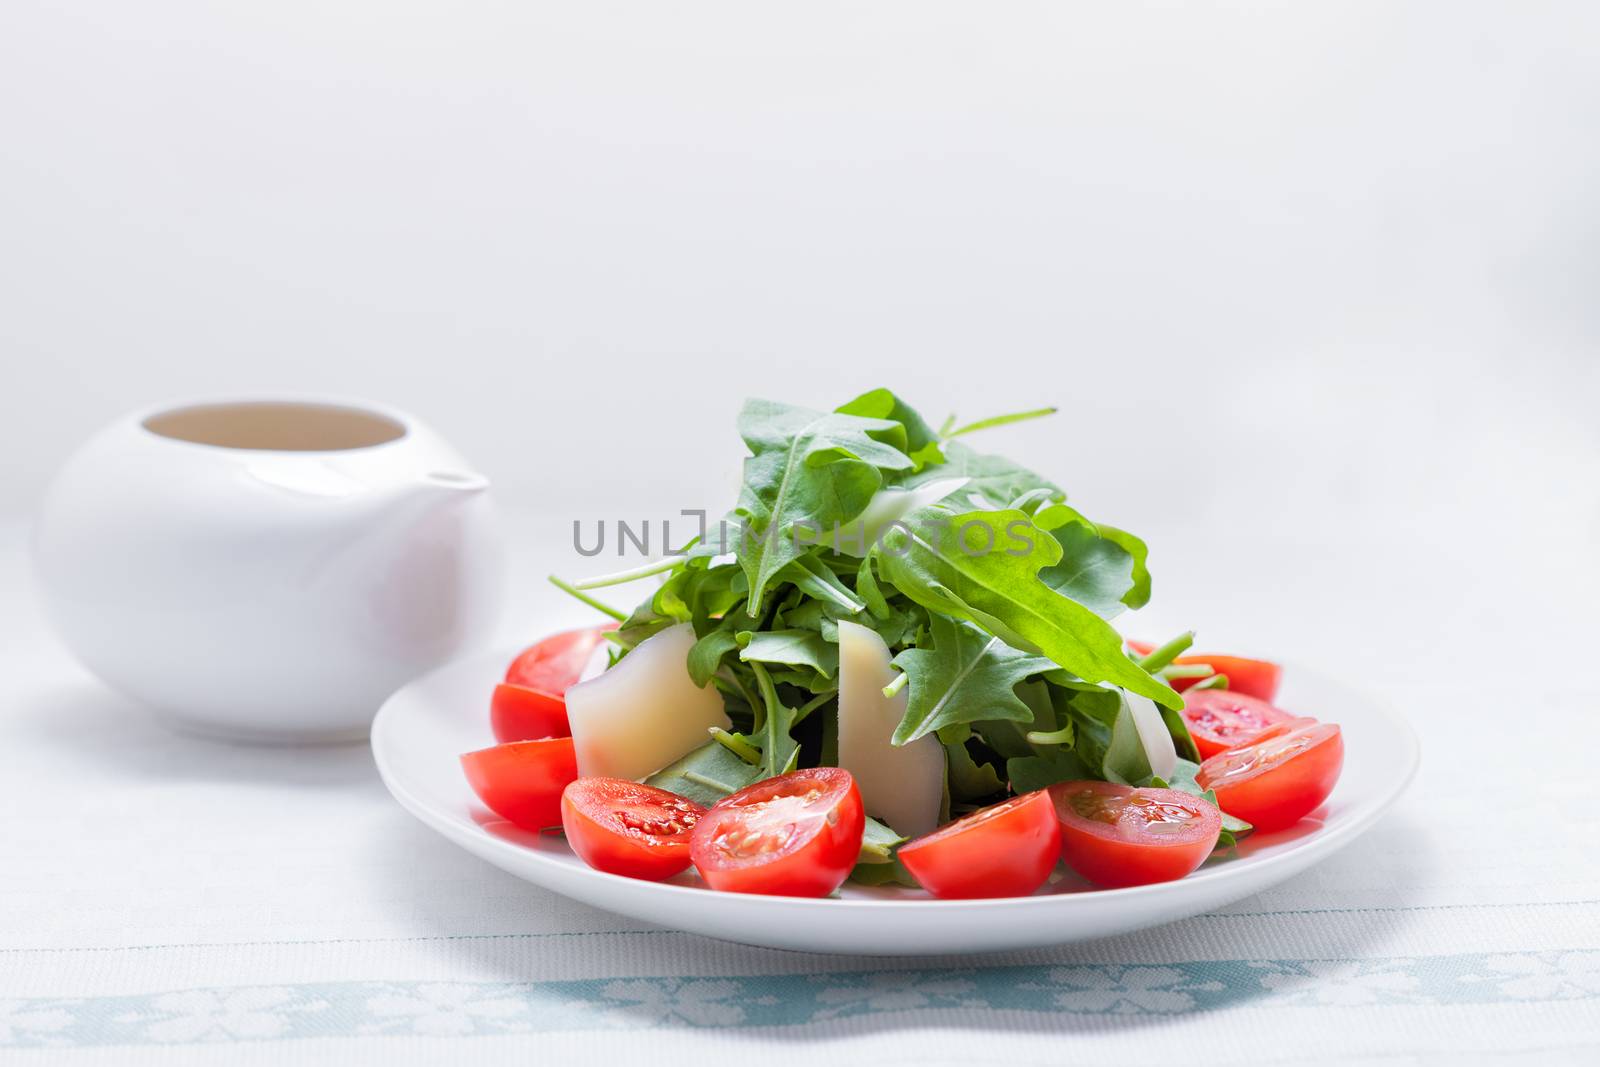 Salad with arugula, tomatoes served on a white plate